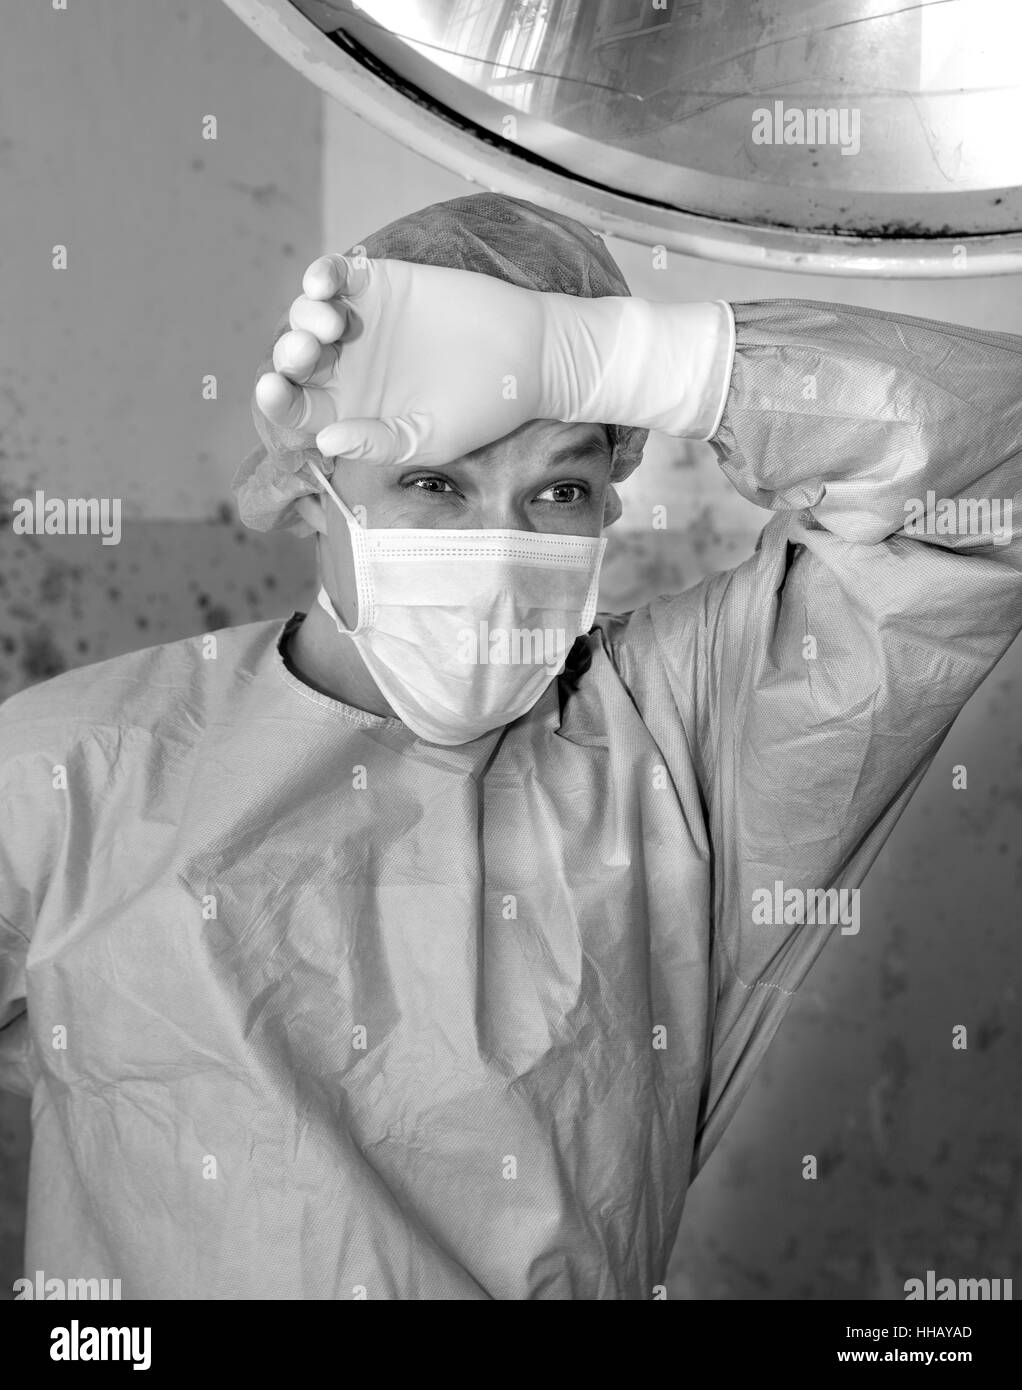 doctor, physician, medic, medical practicioner, blue, humans, human beings, Stock Photo